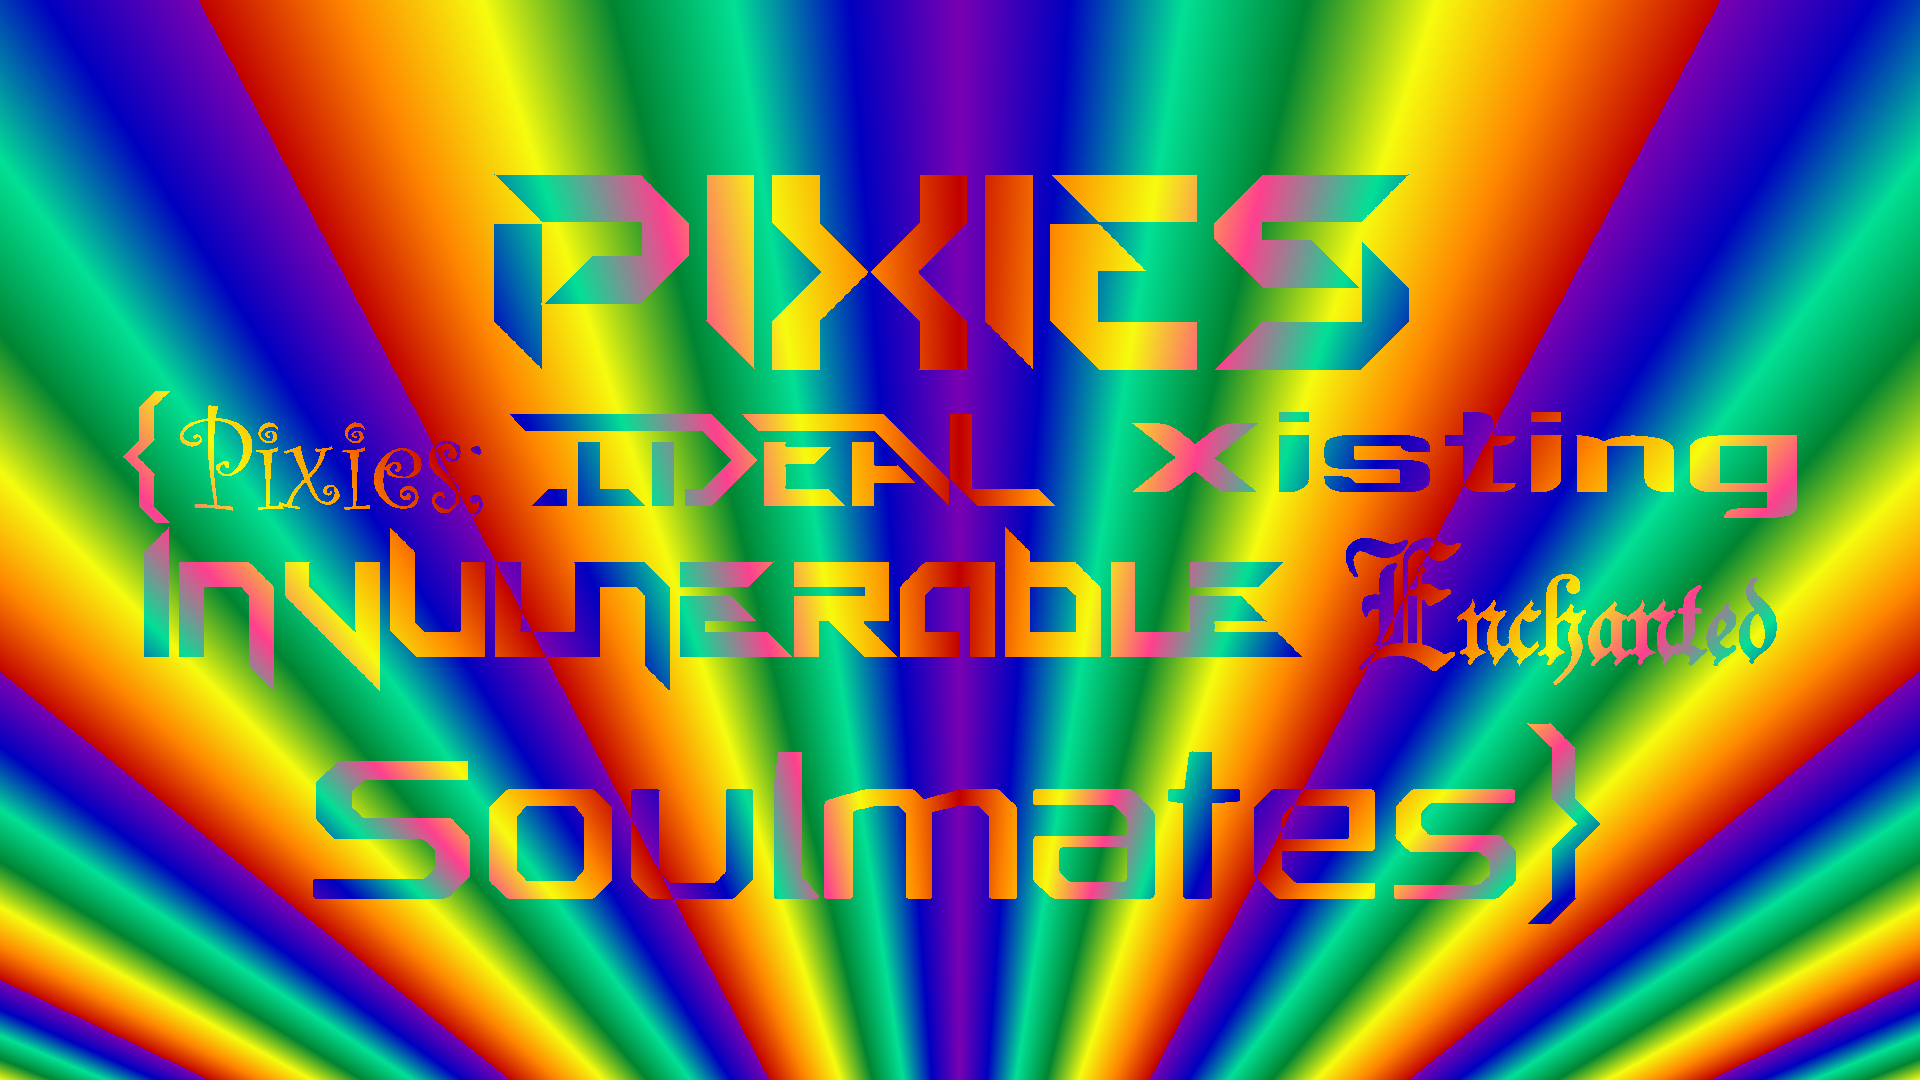 For Pixies